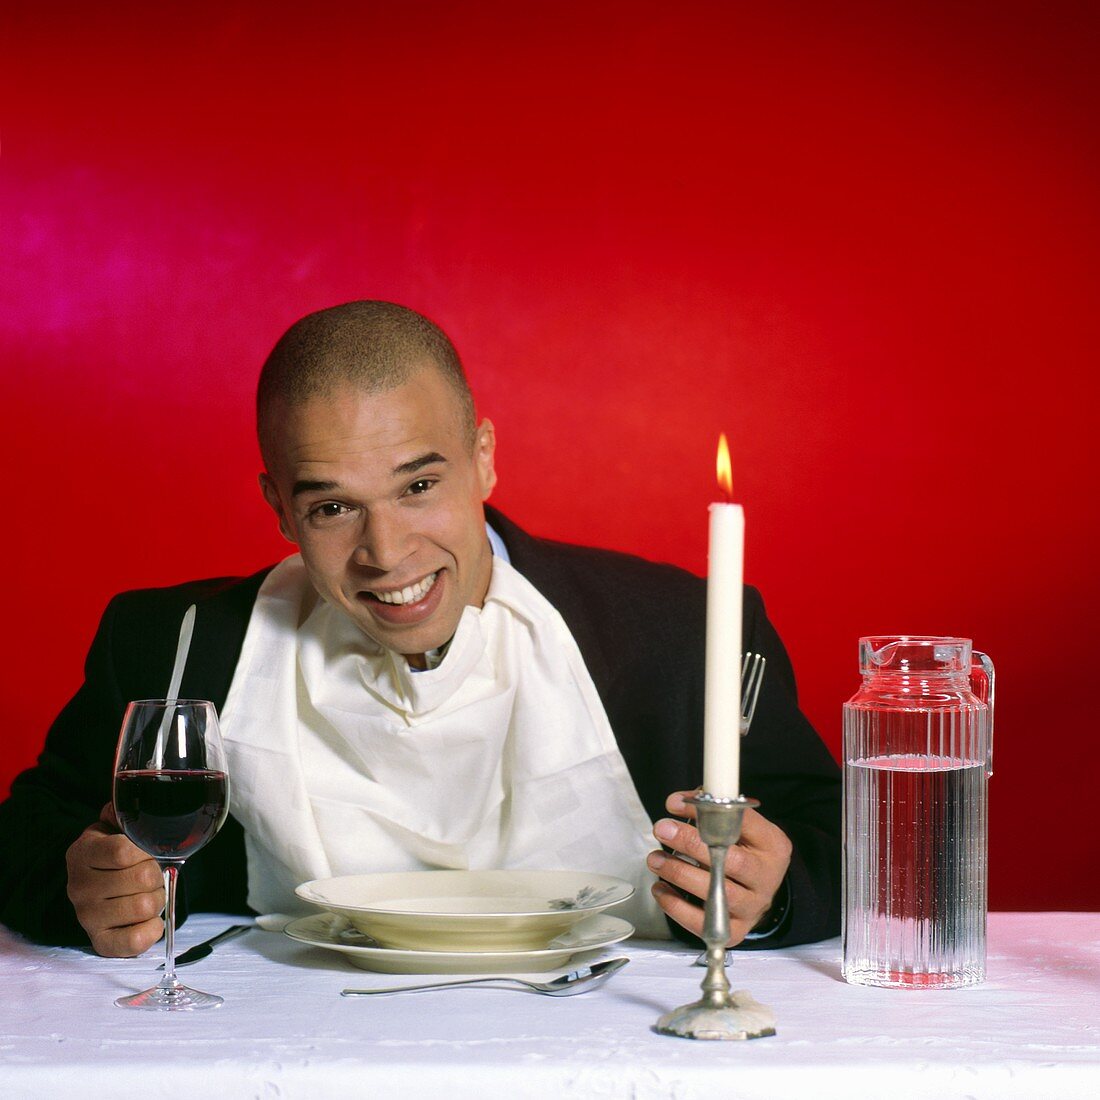 Man sitting in front of empty plate with water and wine